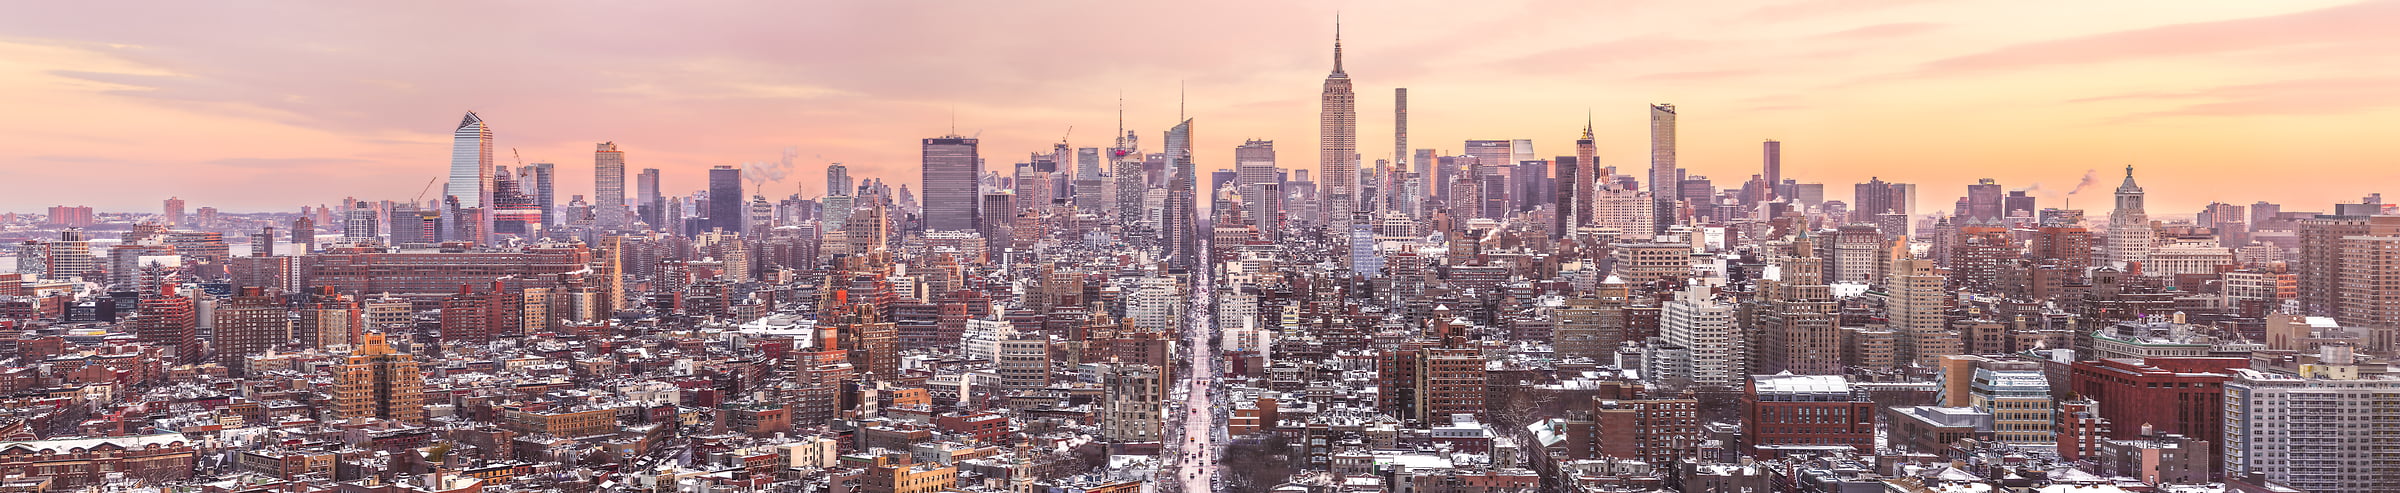 1,150 megapixels! A very high resolution, large-format VAST photo print of the NYC skyline in winter snow; cityscape sunrise fine art photo created by Dan Piech in New York City.